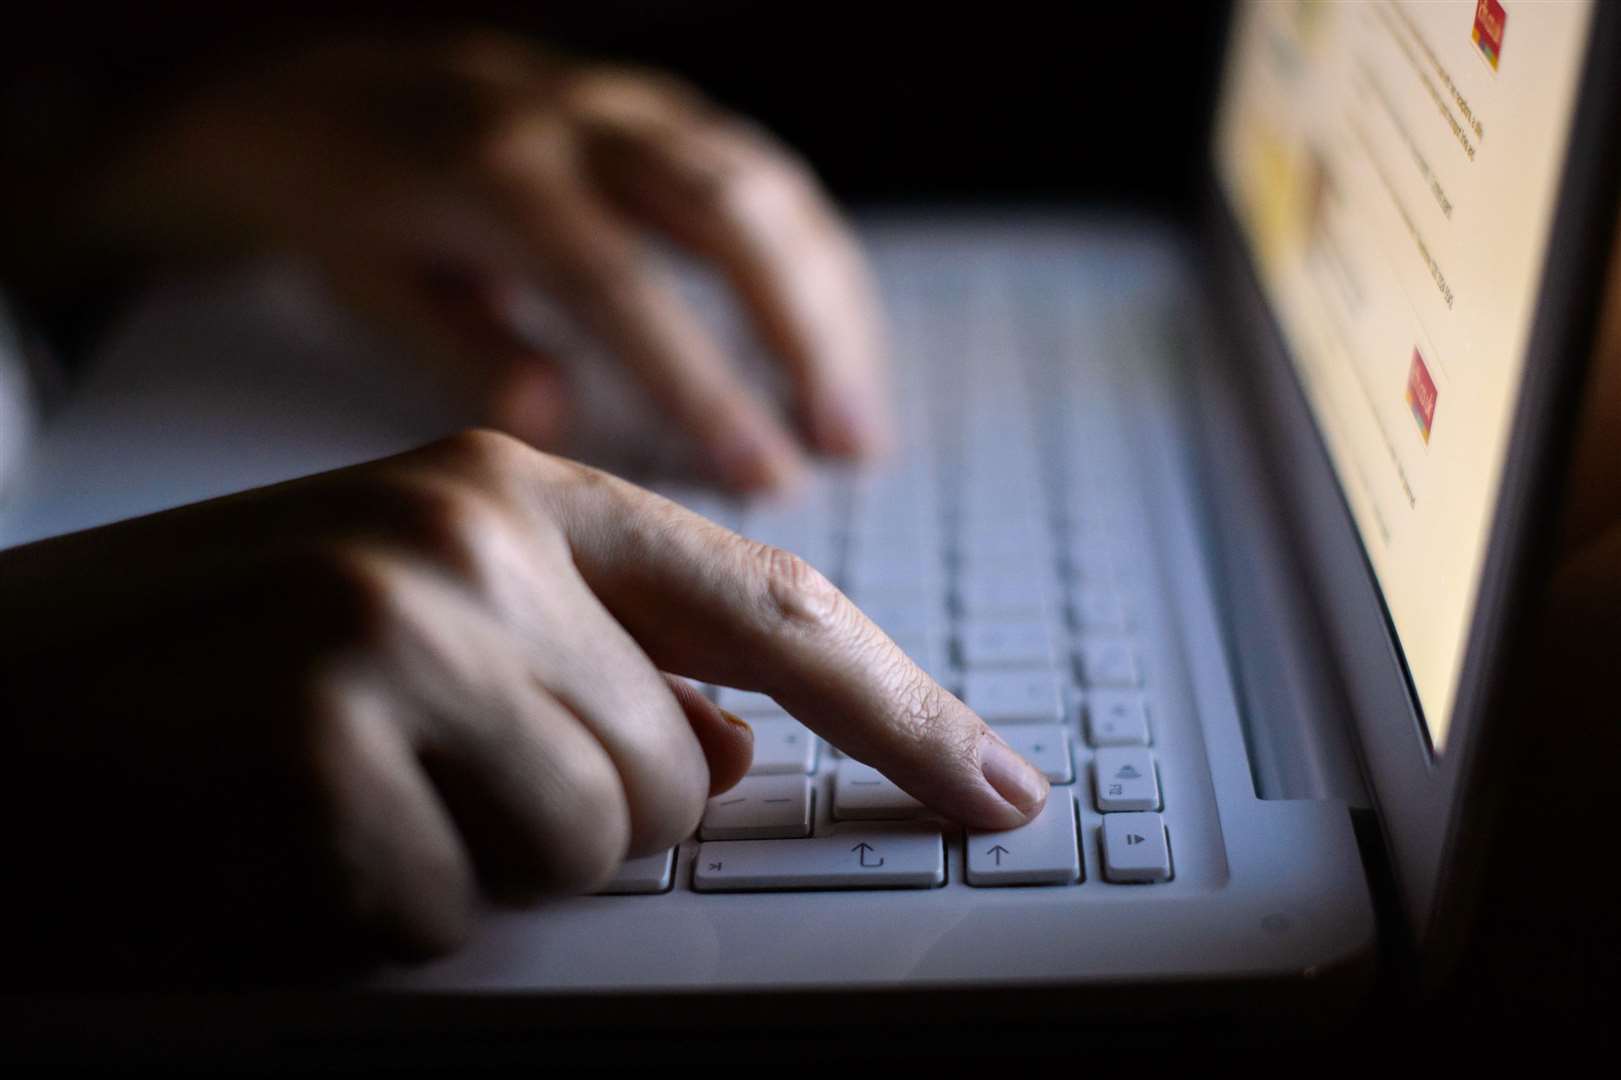 Police found a laptop containing indecent images of children hidden behind a toilet